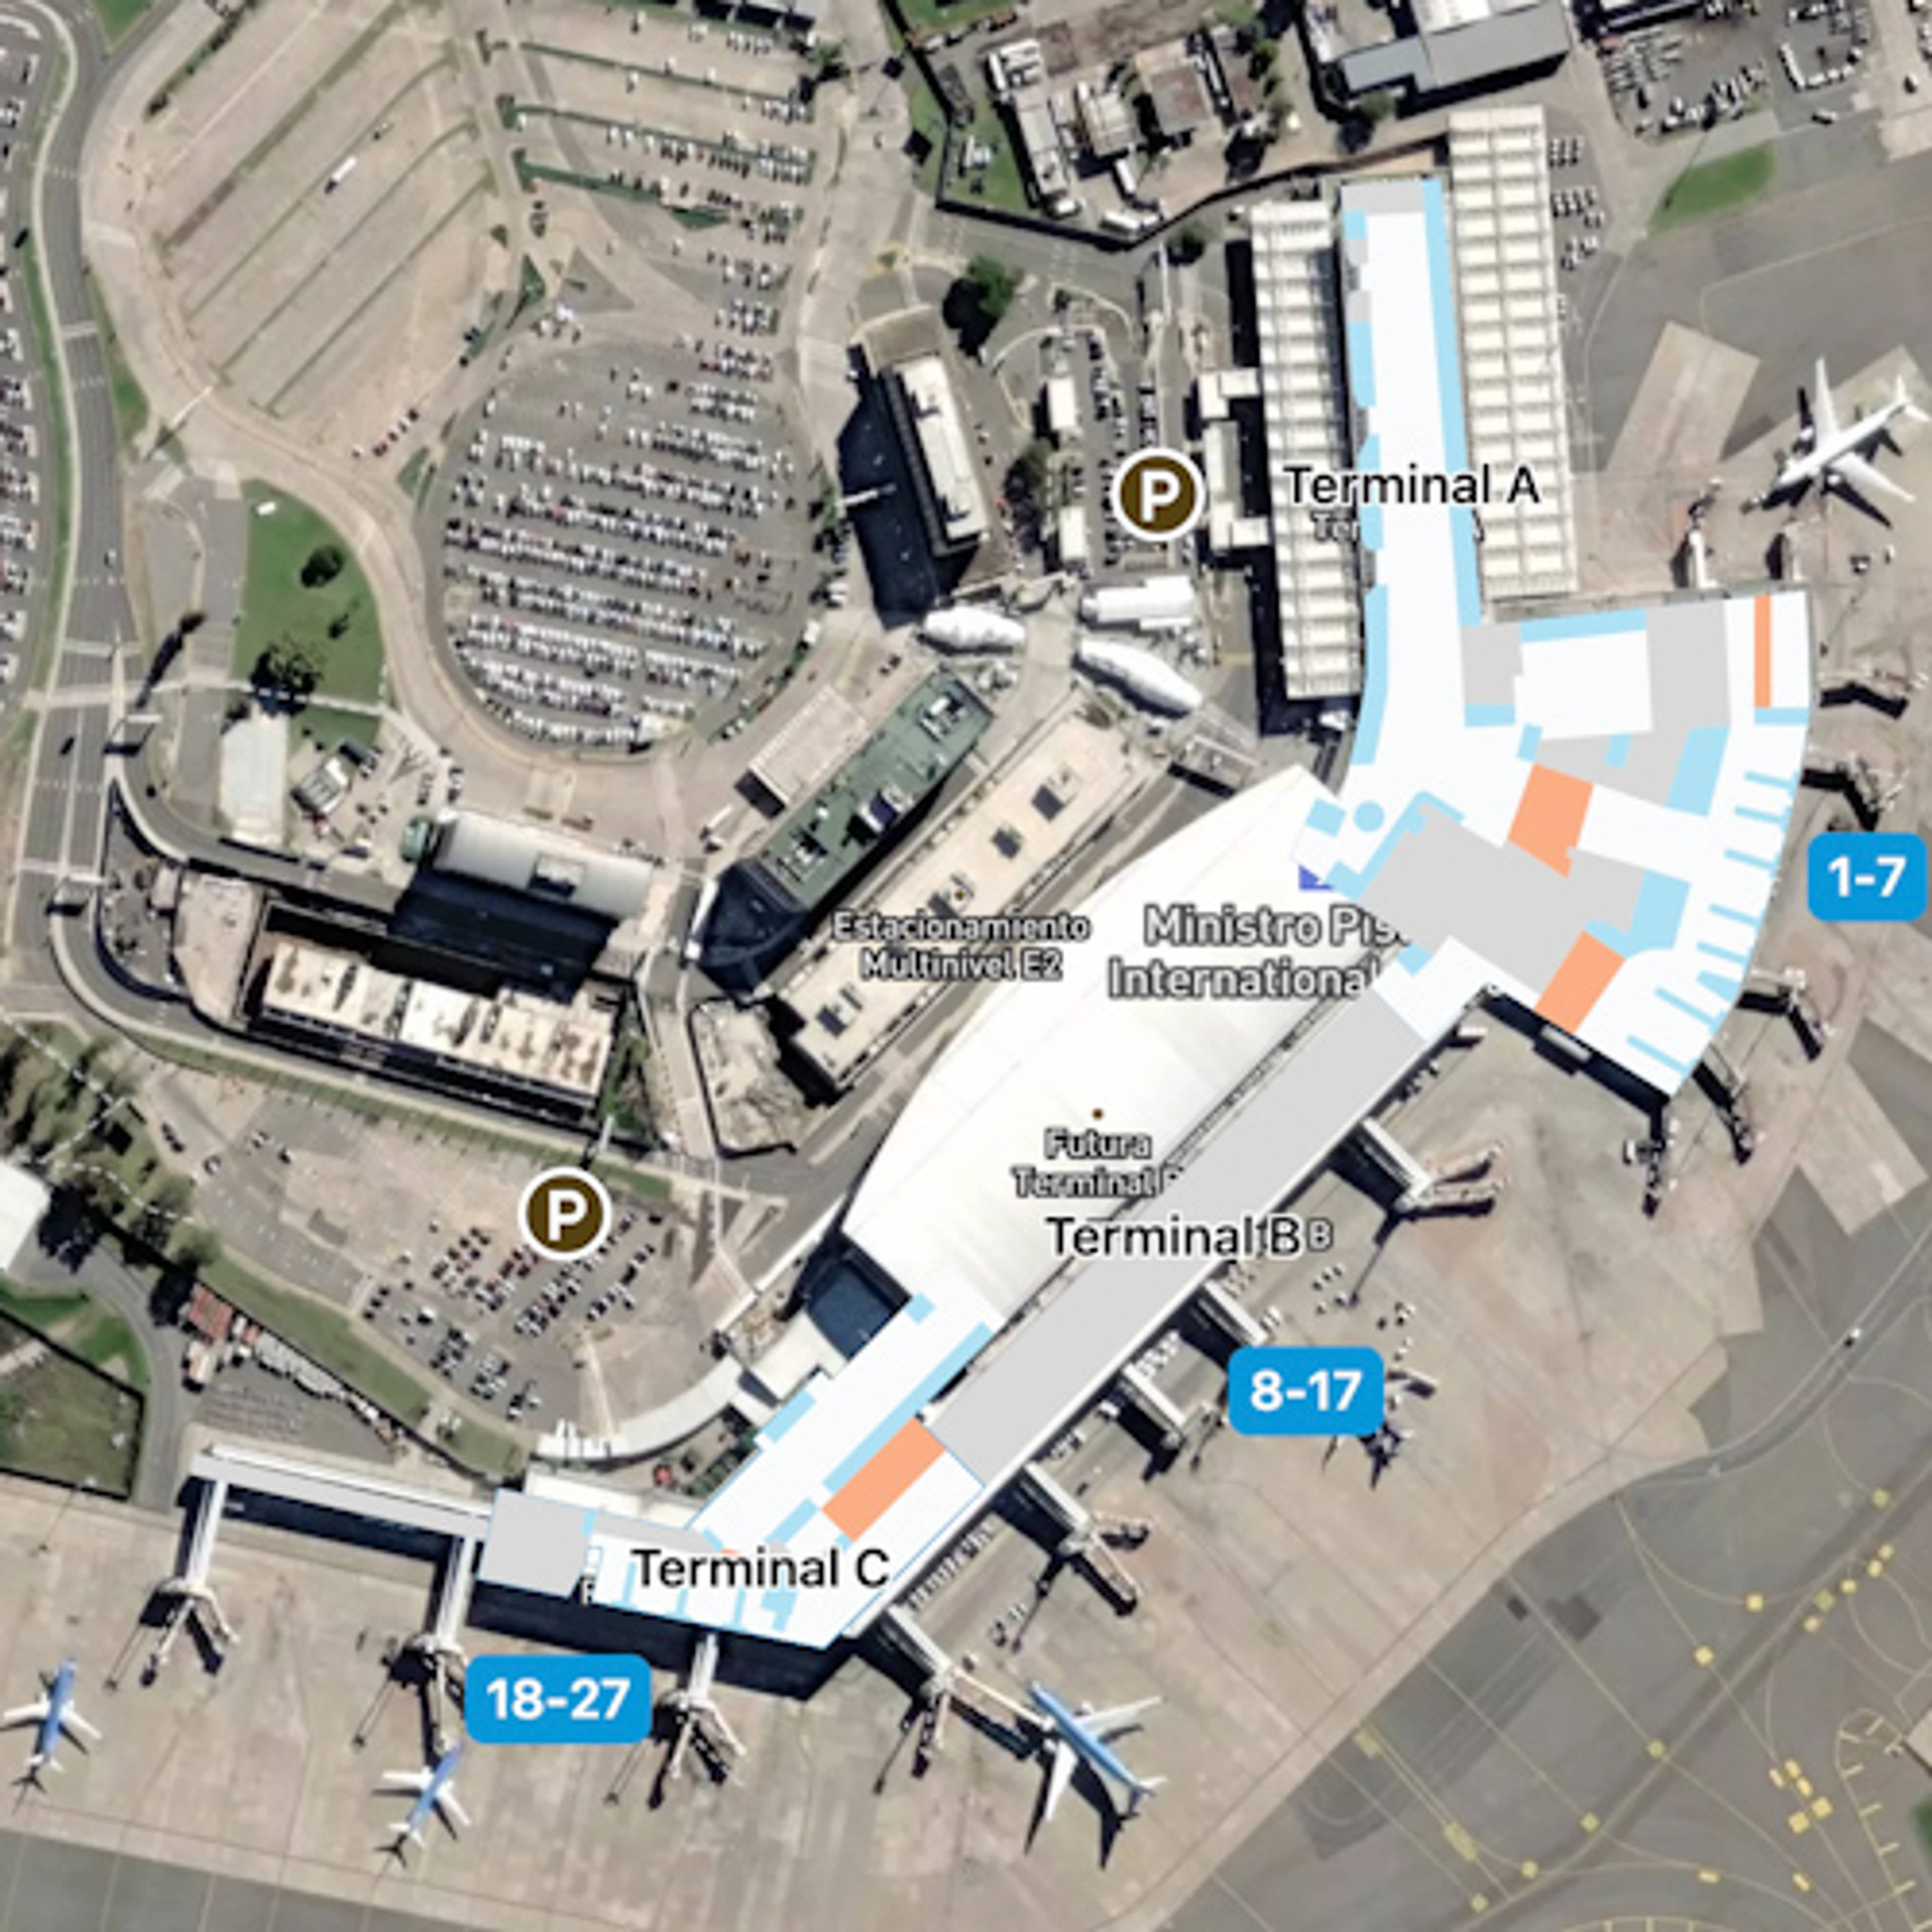 Buenos Aires Ezeiza Airport EZE Terminal Overview Map